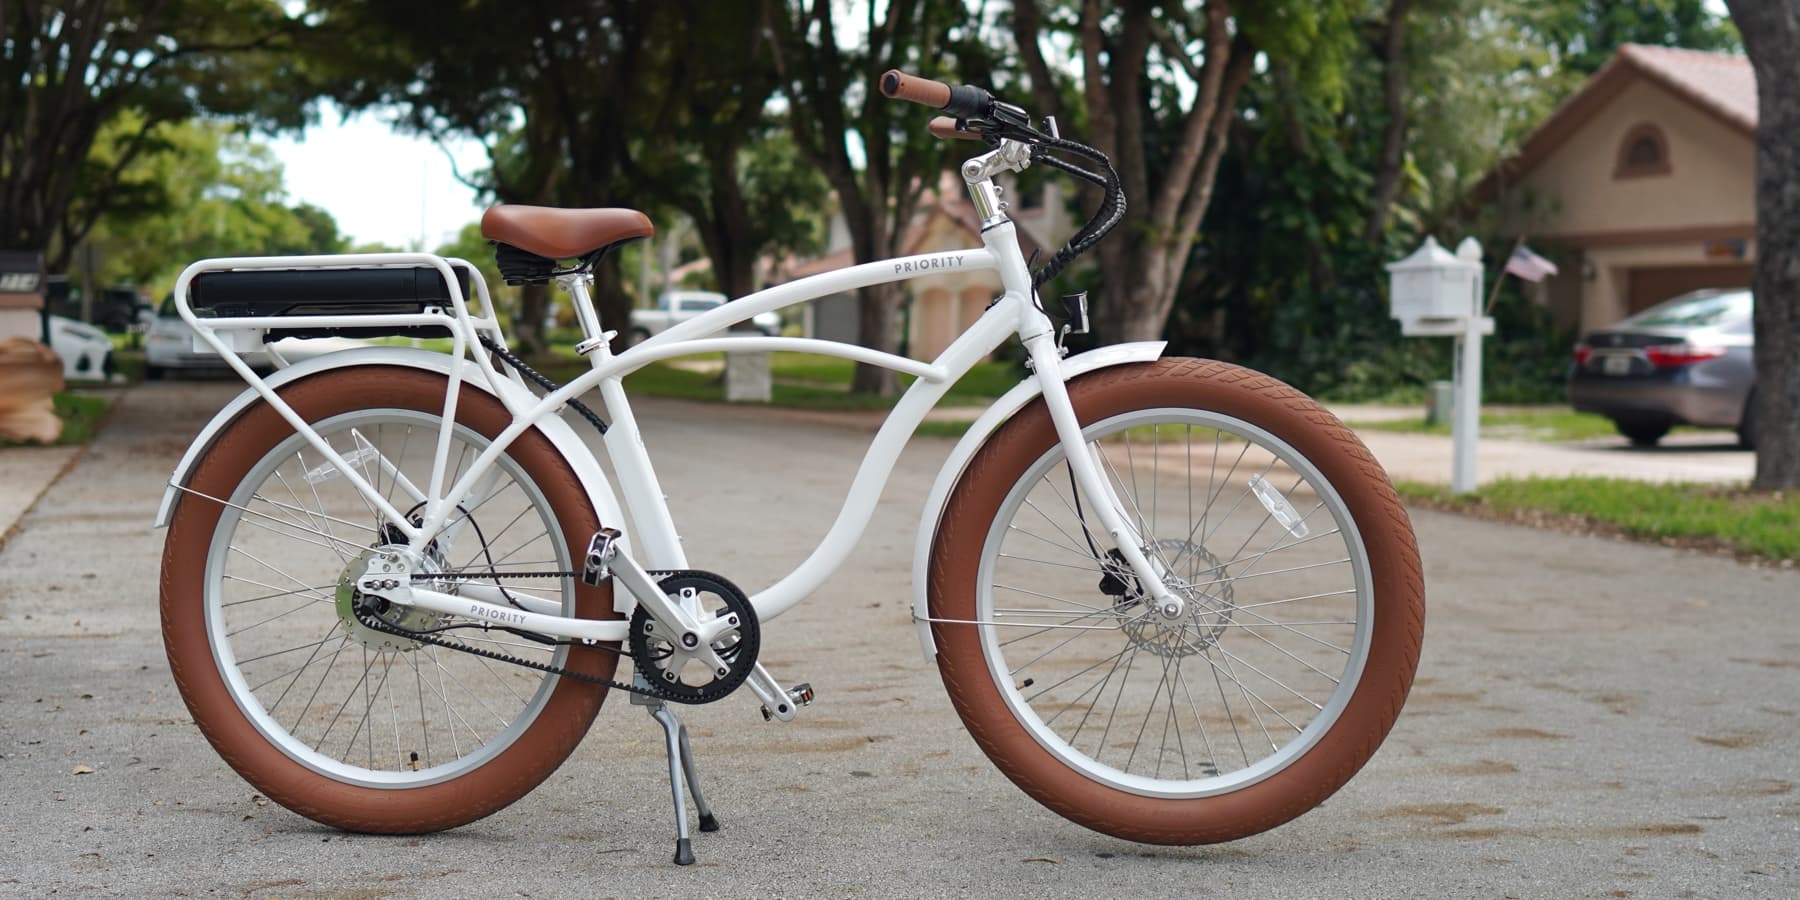 There's a single solution for everyone's problem with electric bikes